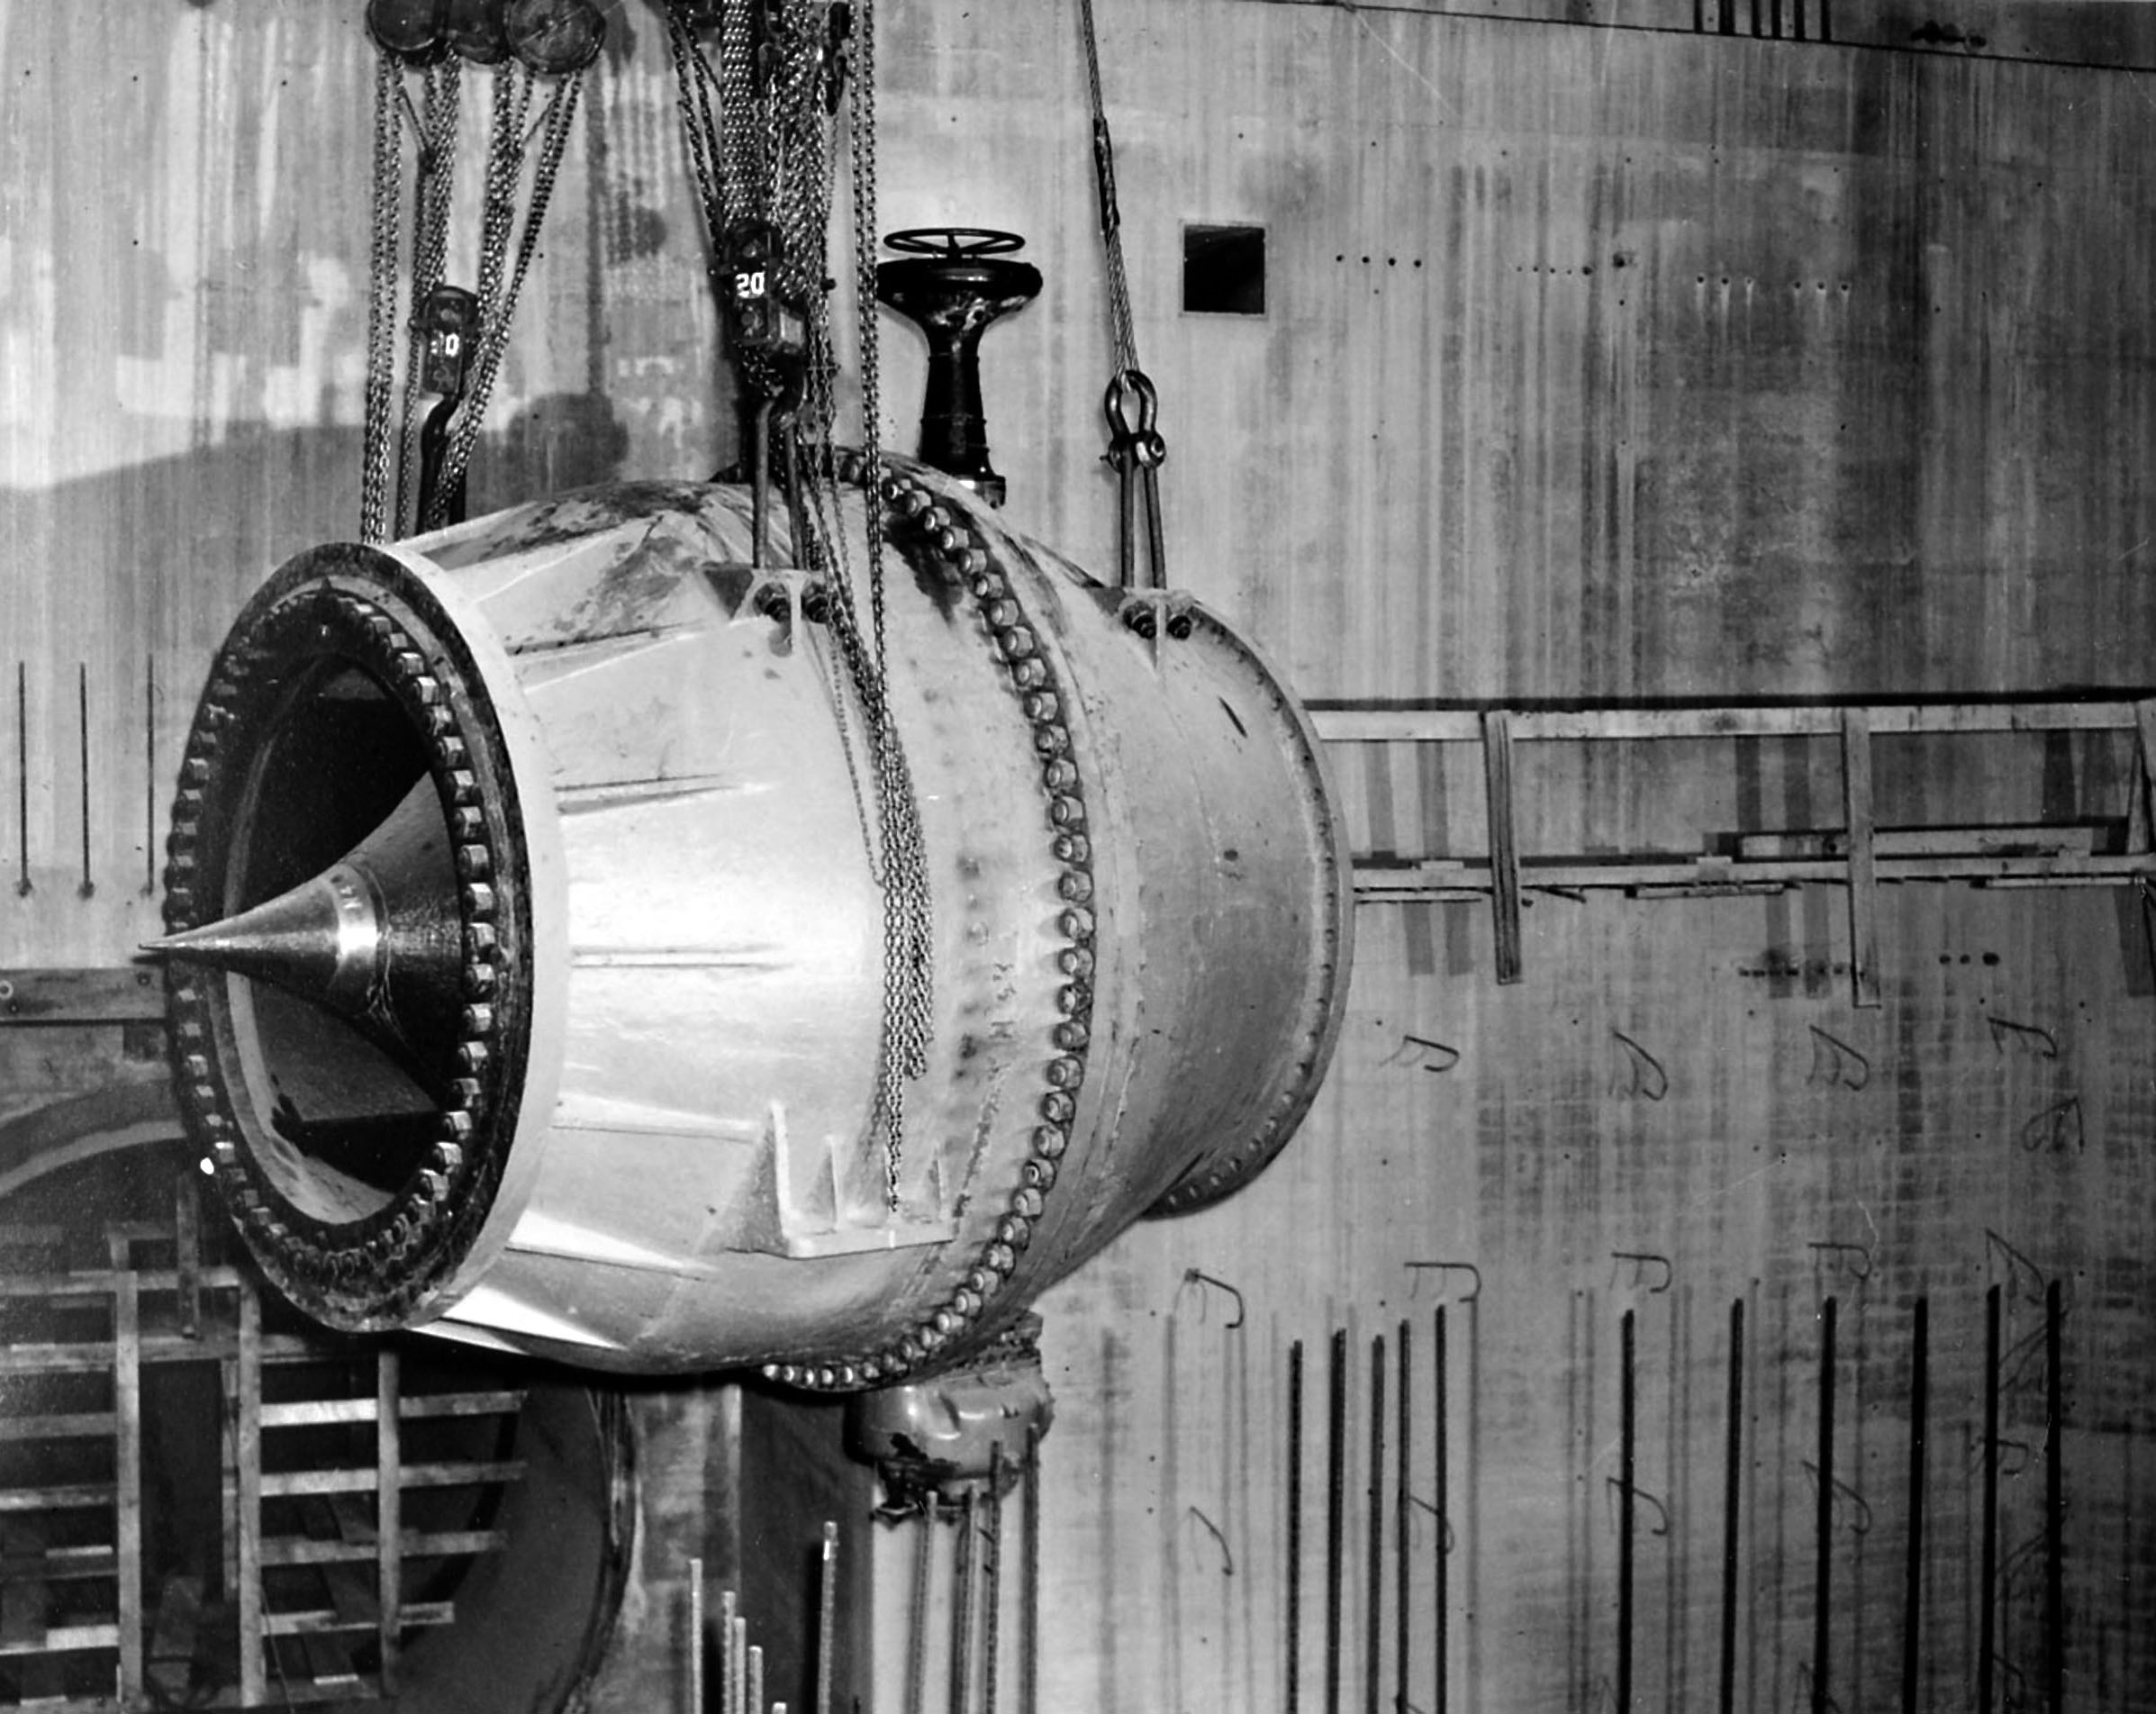 November 24, 1944. This needle valve being lowered into base of R-8 in the east powerhouse of Grand Coulee Dam.